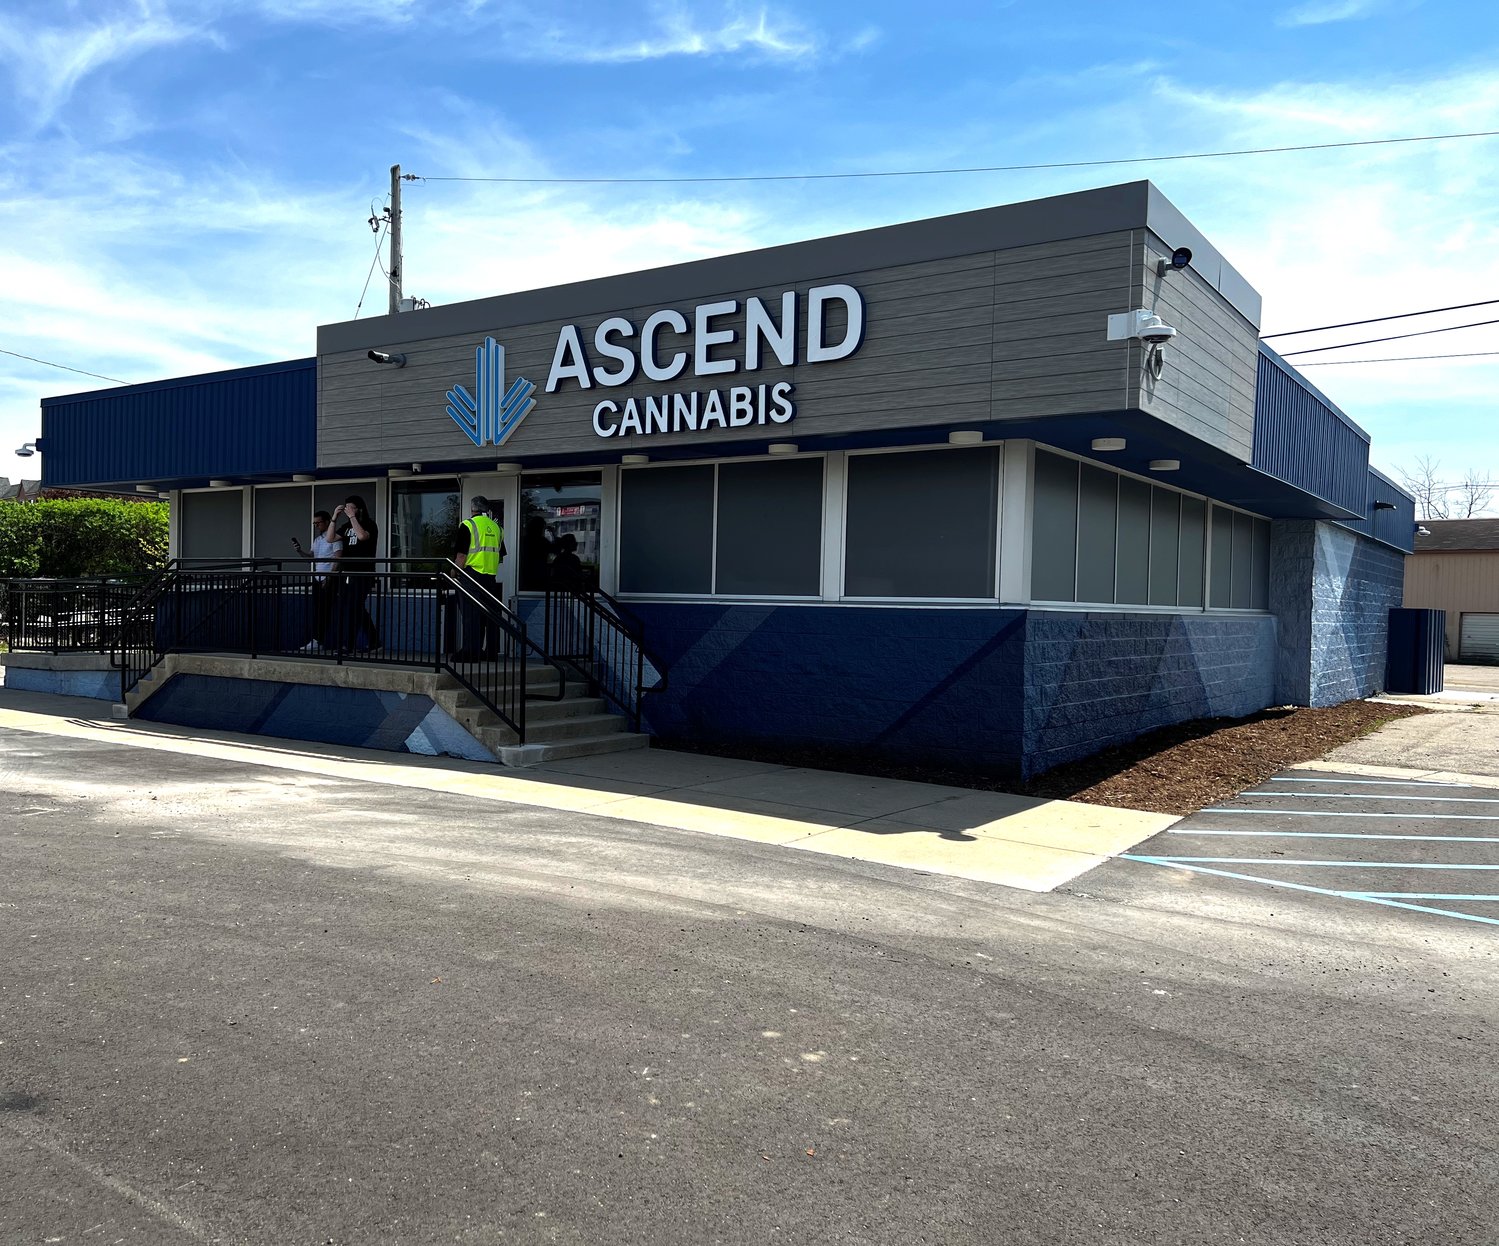 Ascend Cannabis is set to open for business on Tuesday (May 24).